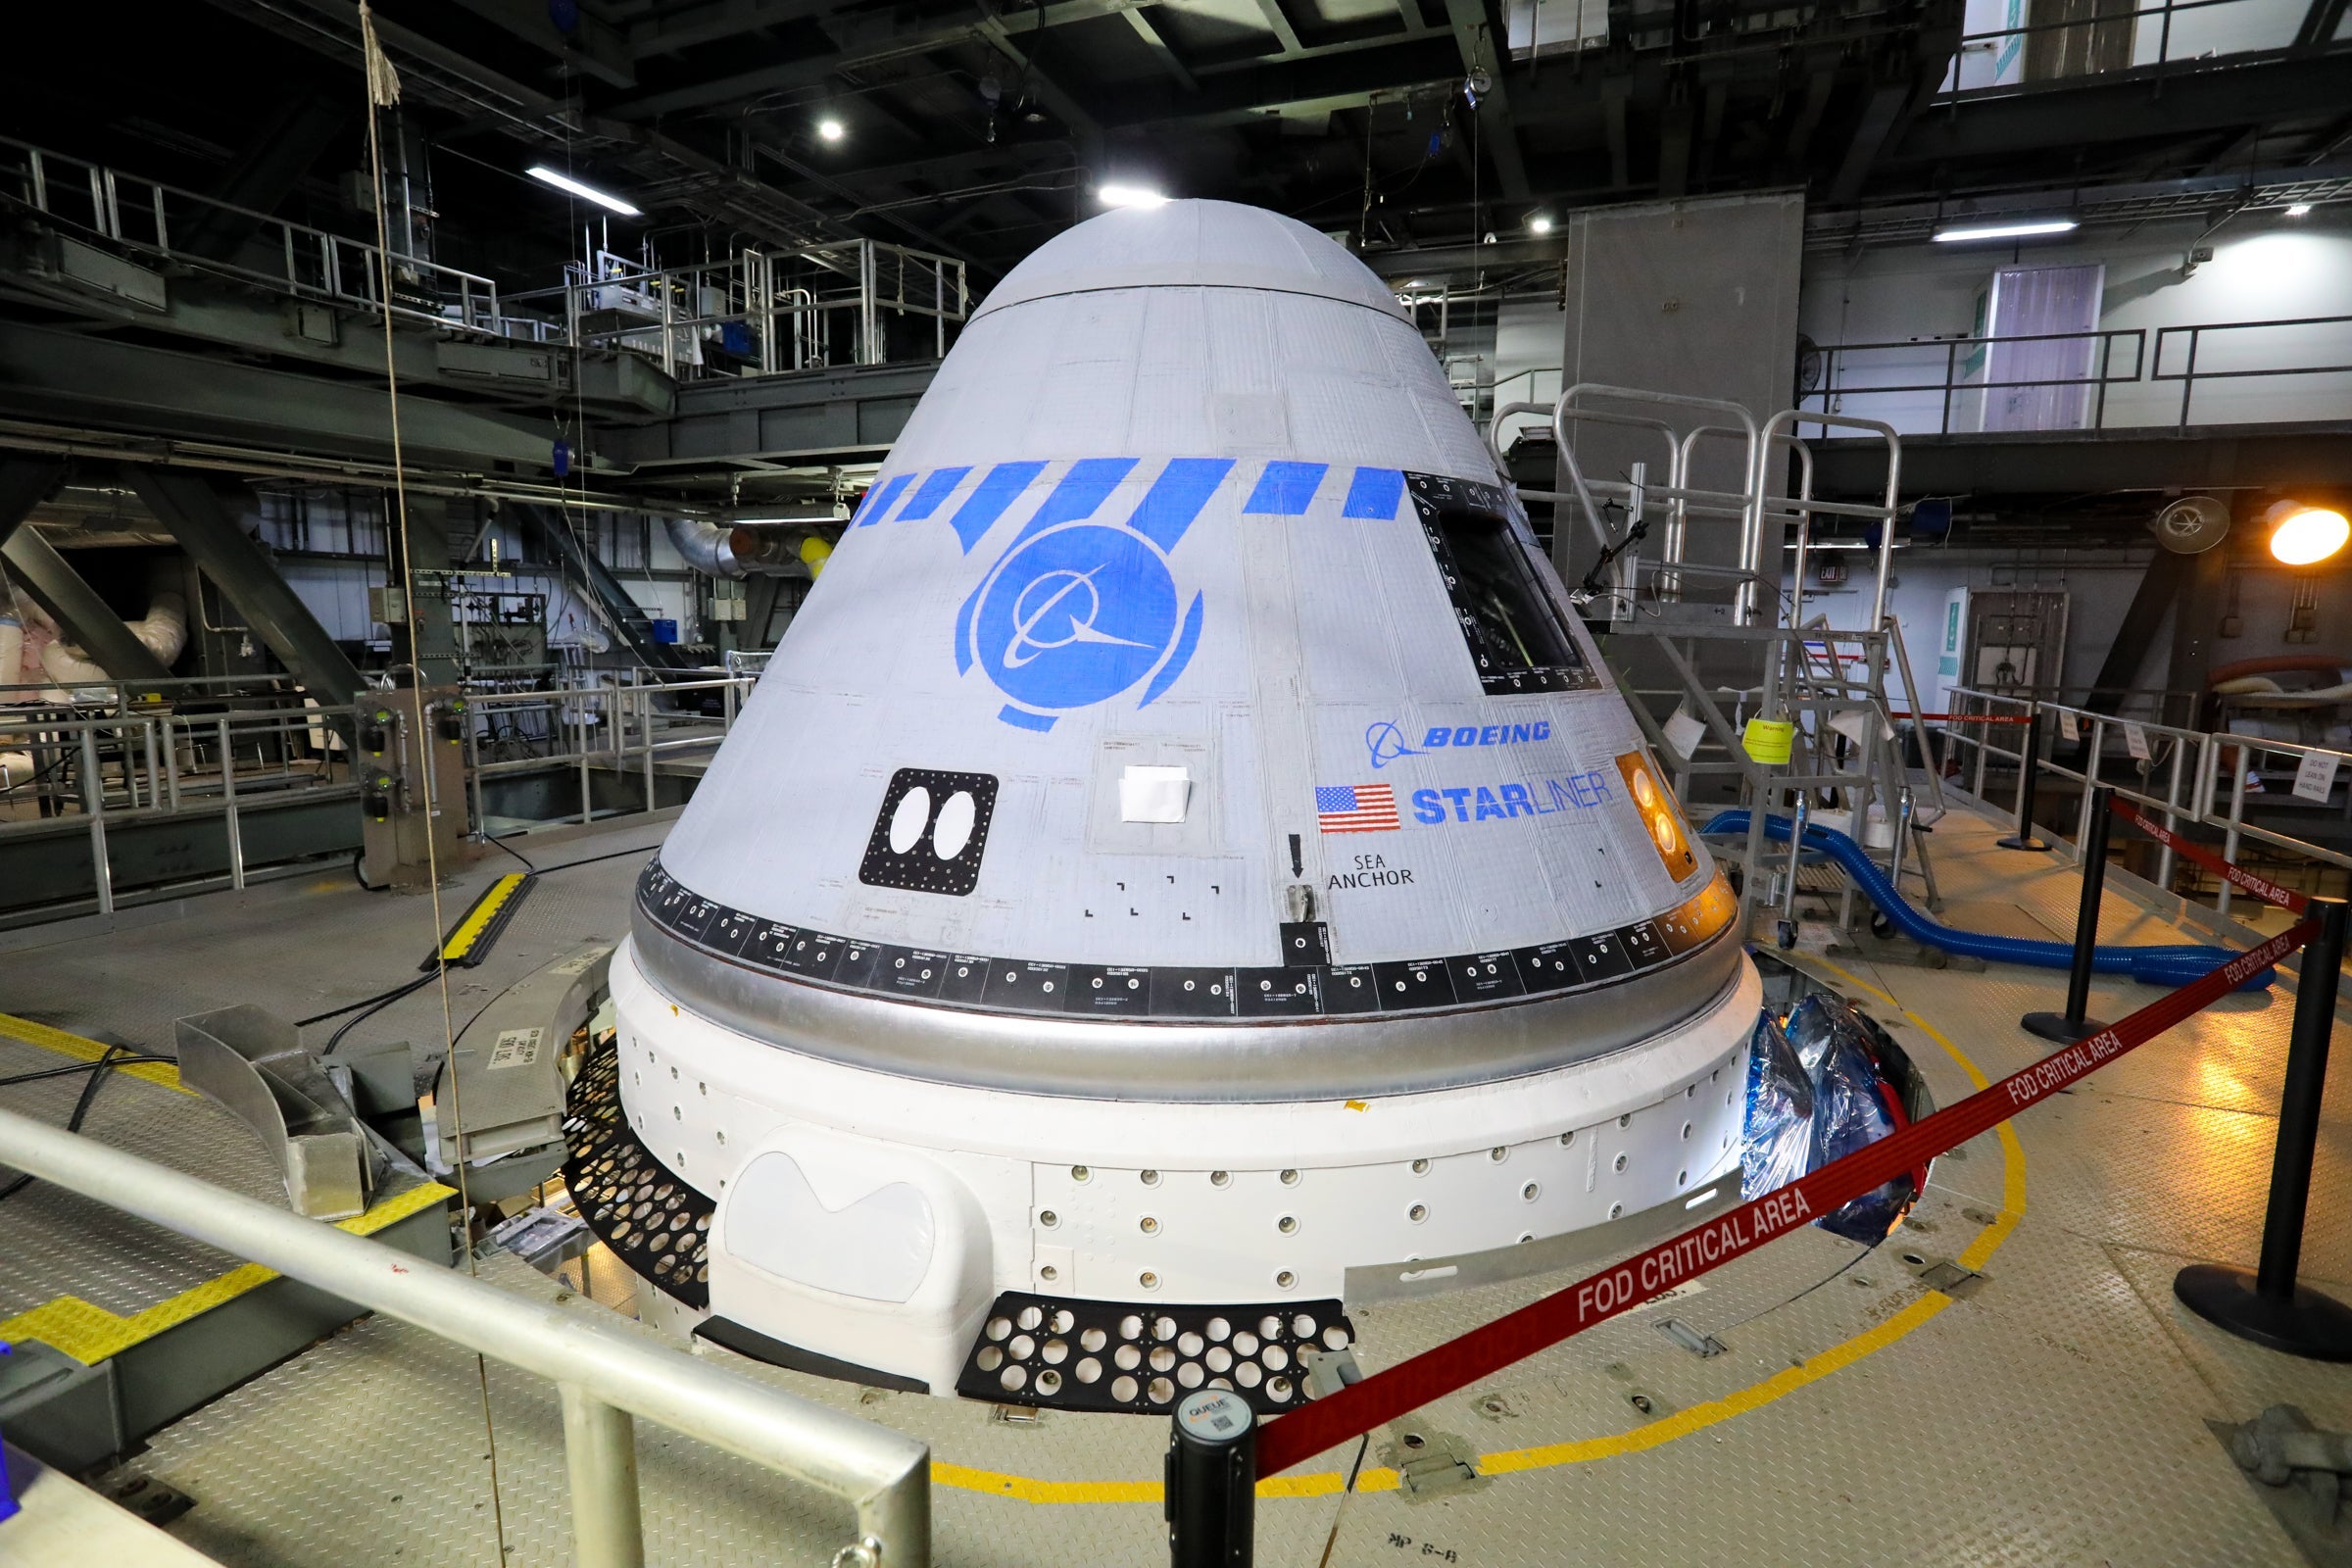 Starliner inside the Vertical Integration Facility. (Photo: Boeing)